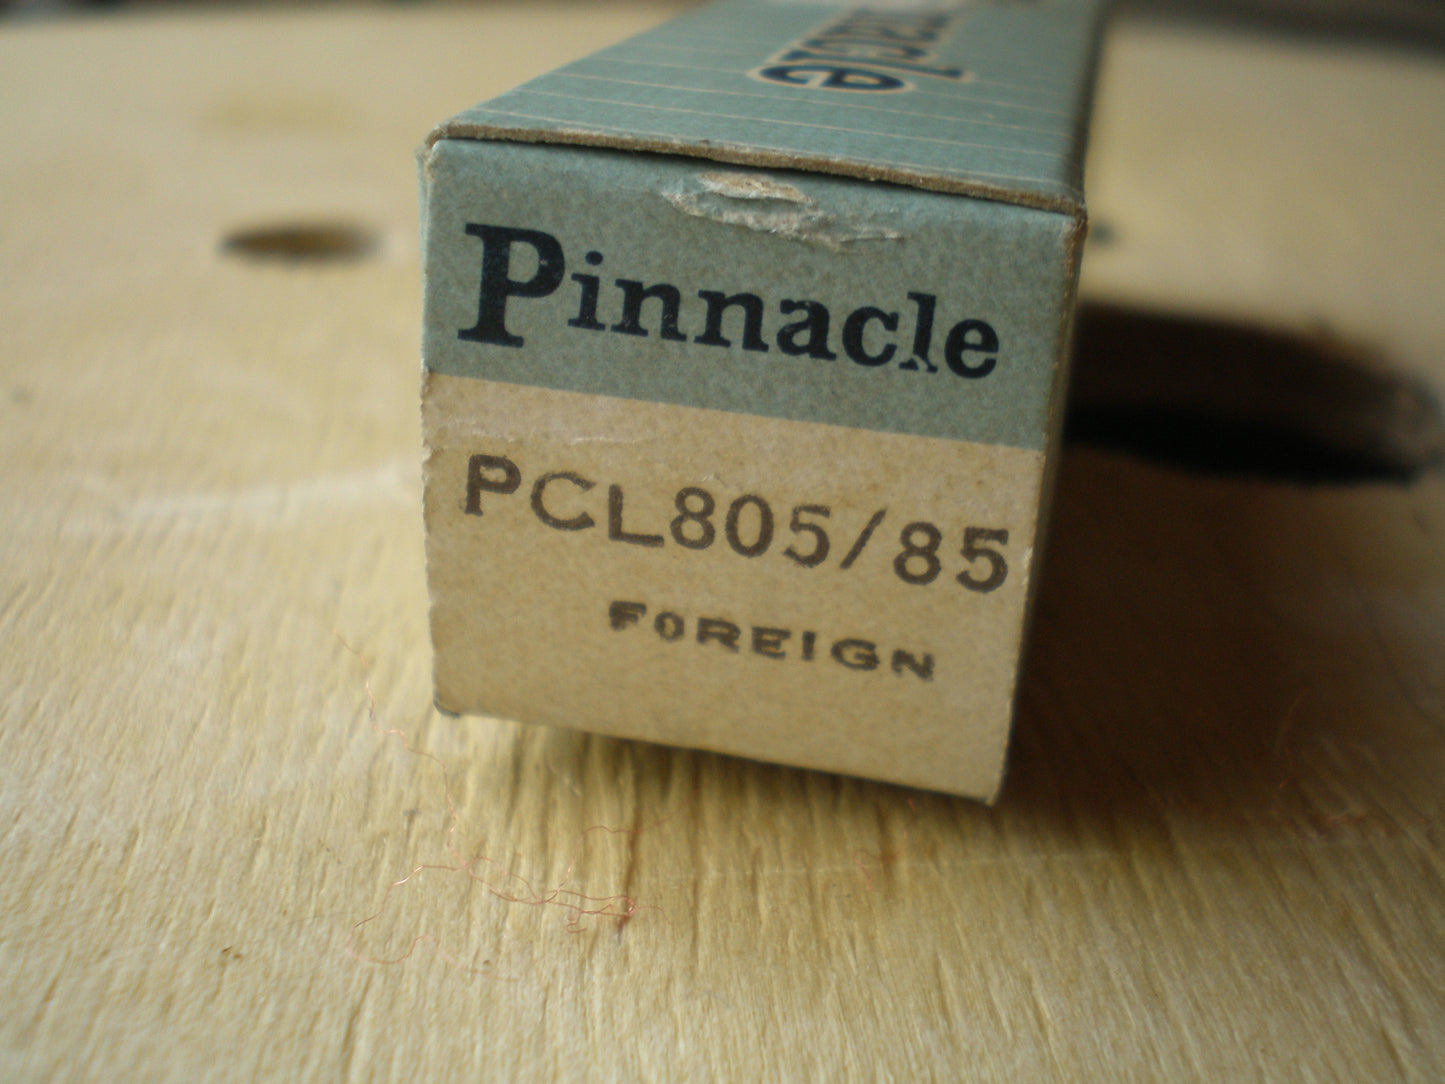 PCL805 Valve used in old tape recorders